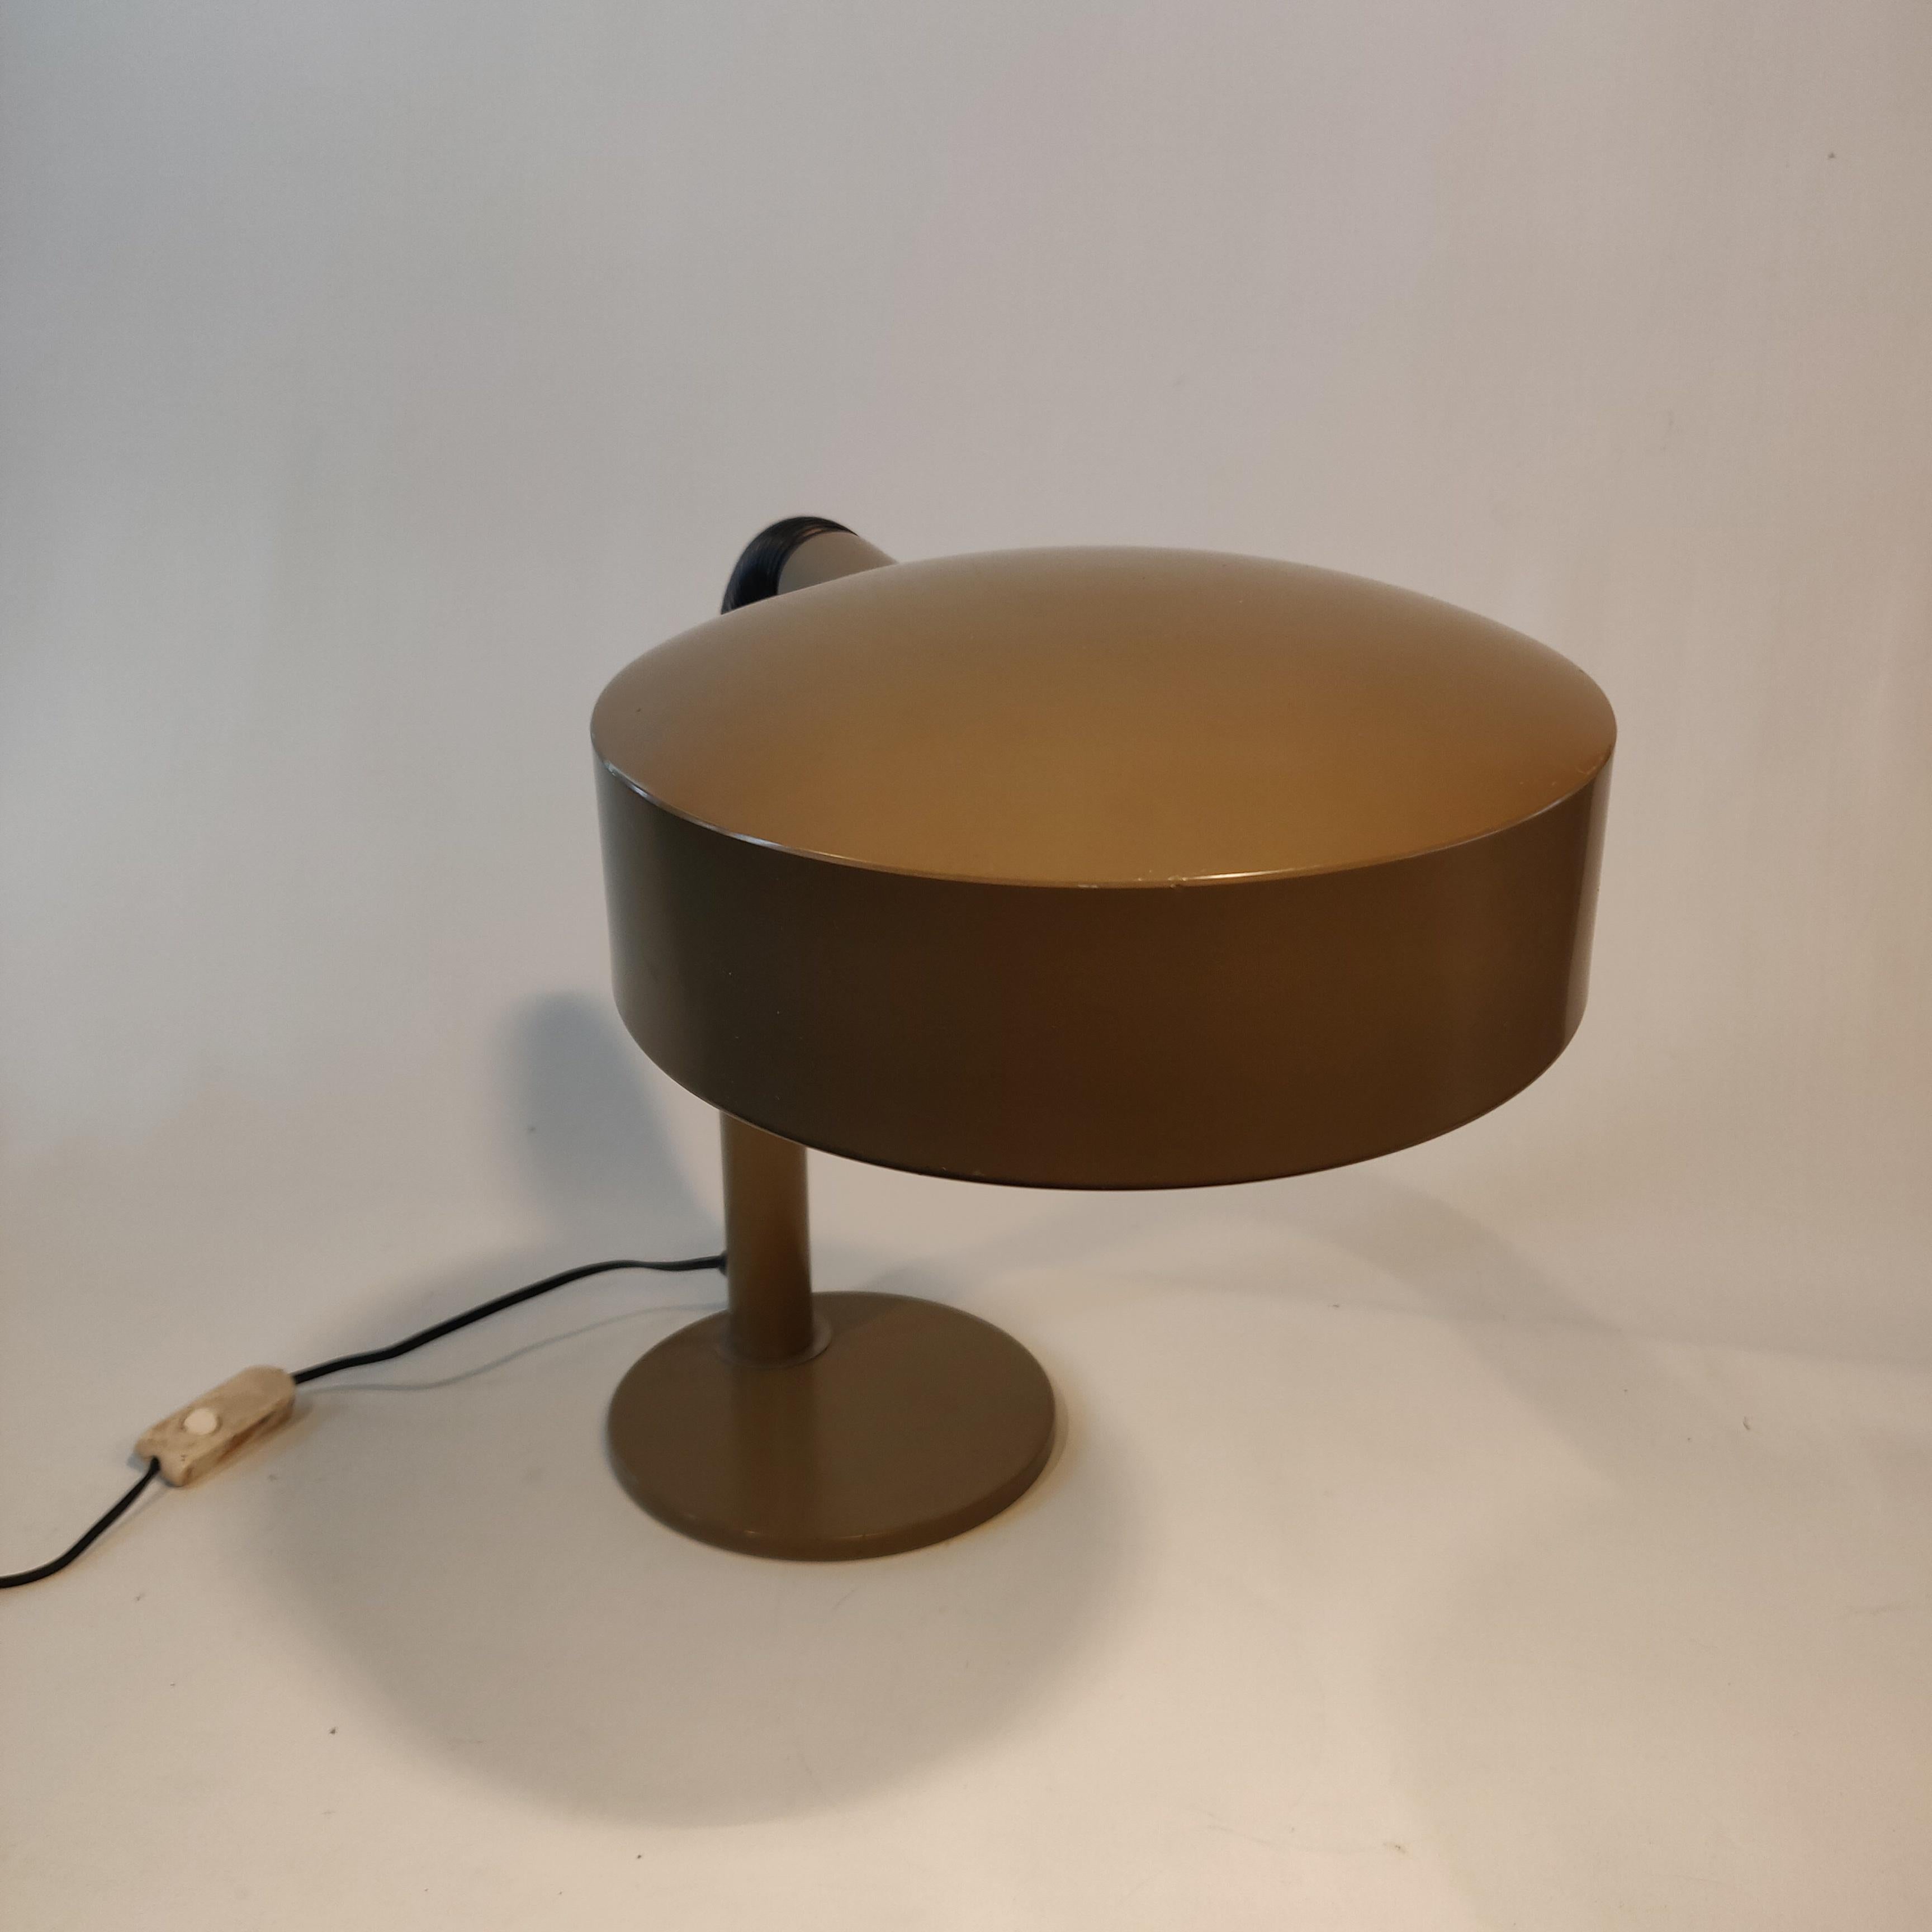 Dutch Design Hala Zeist Holland 1970s gooseneck desk lamp, called pan lamp. Flexible arm, taupe brown color.

Hala is one of the first light companies of The Netherlands, originated in 1932 in the city of Zeist and later moved to Amersfoort.
Herman